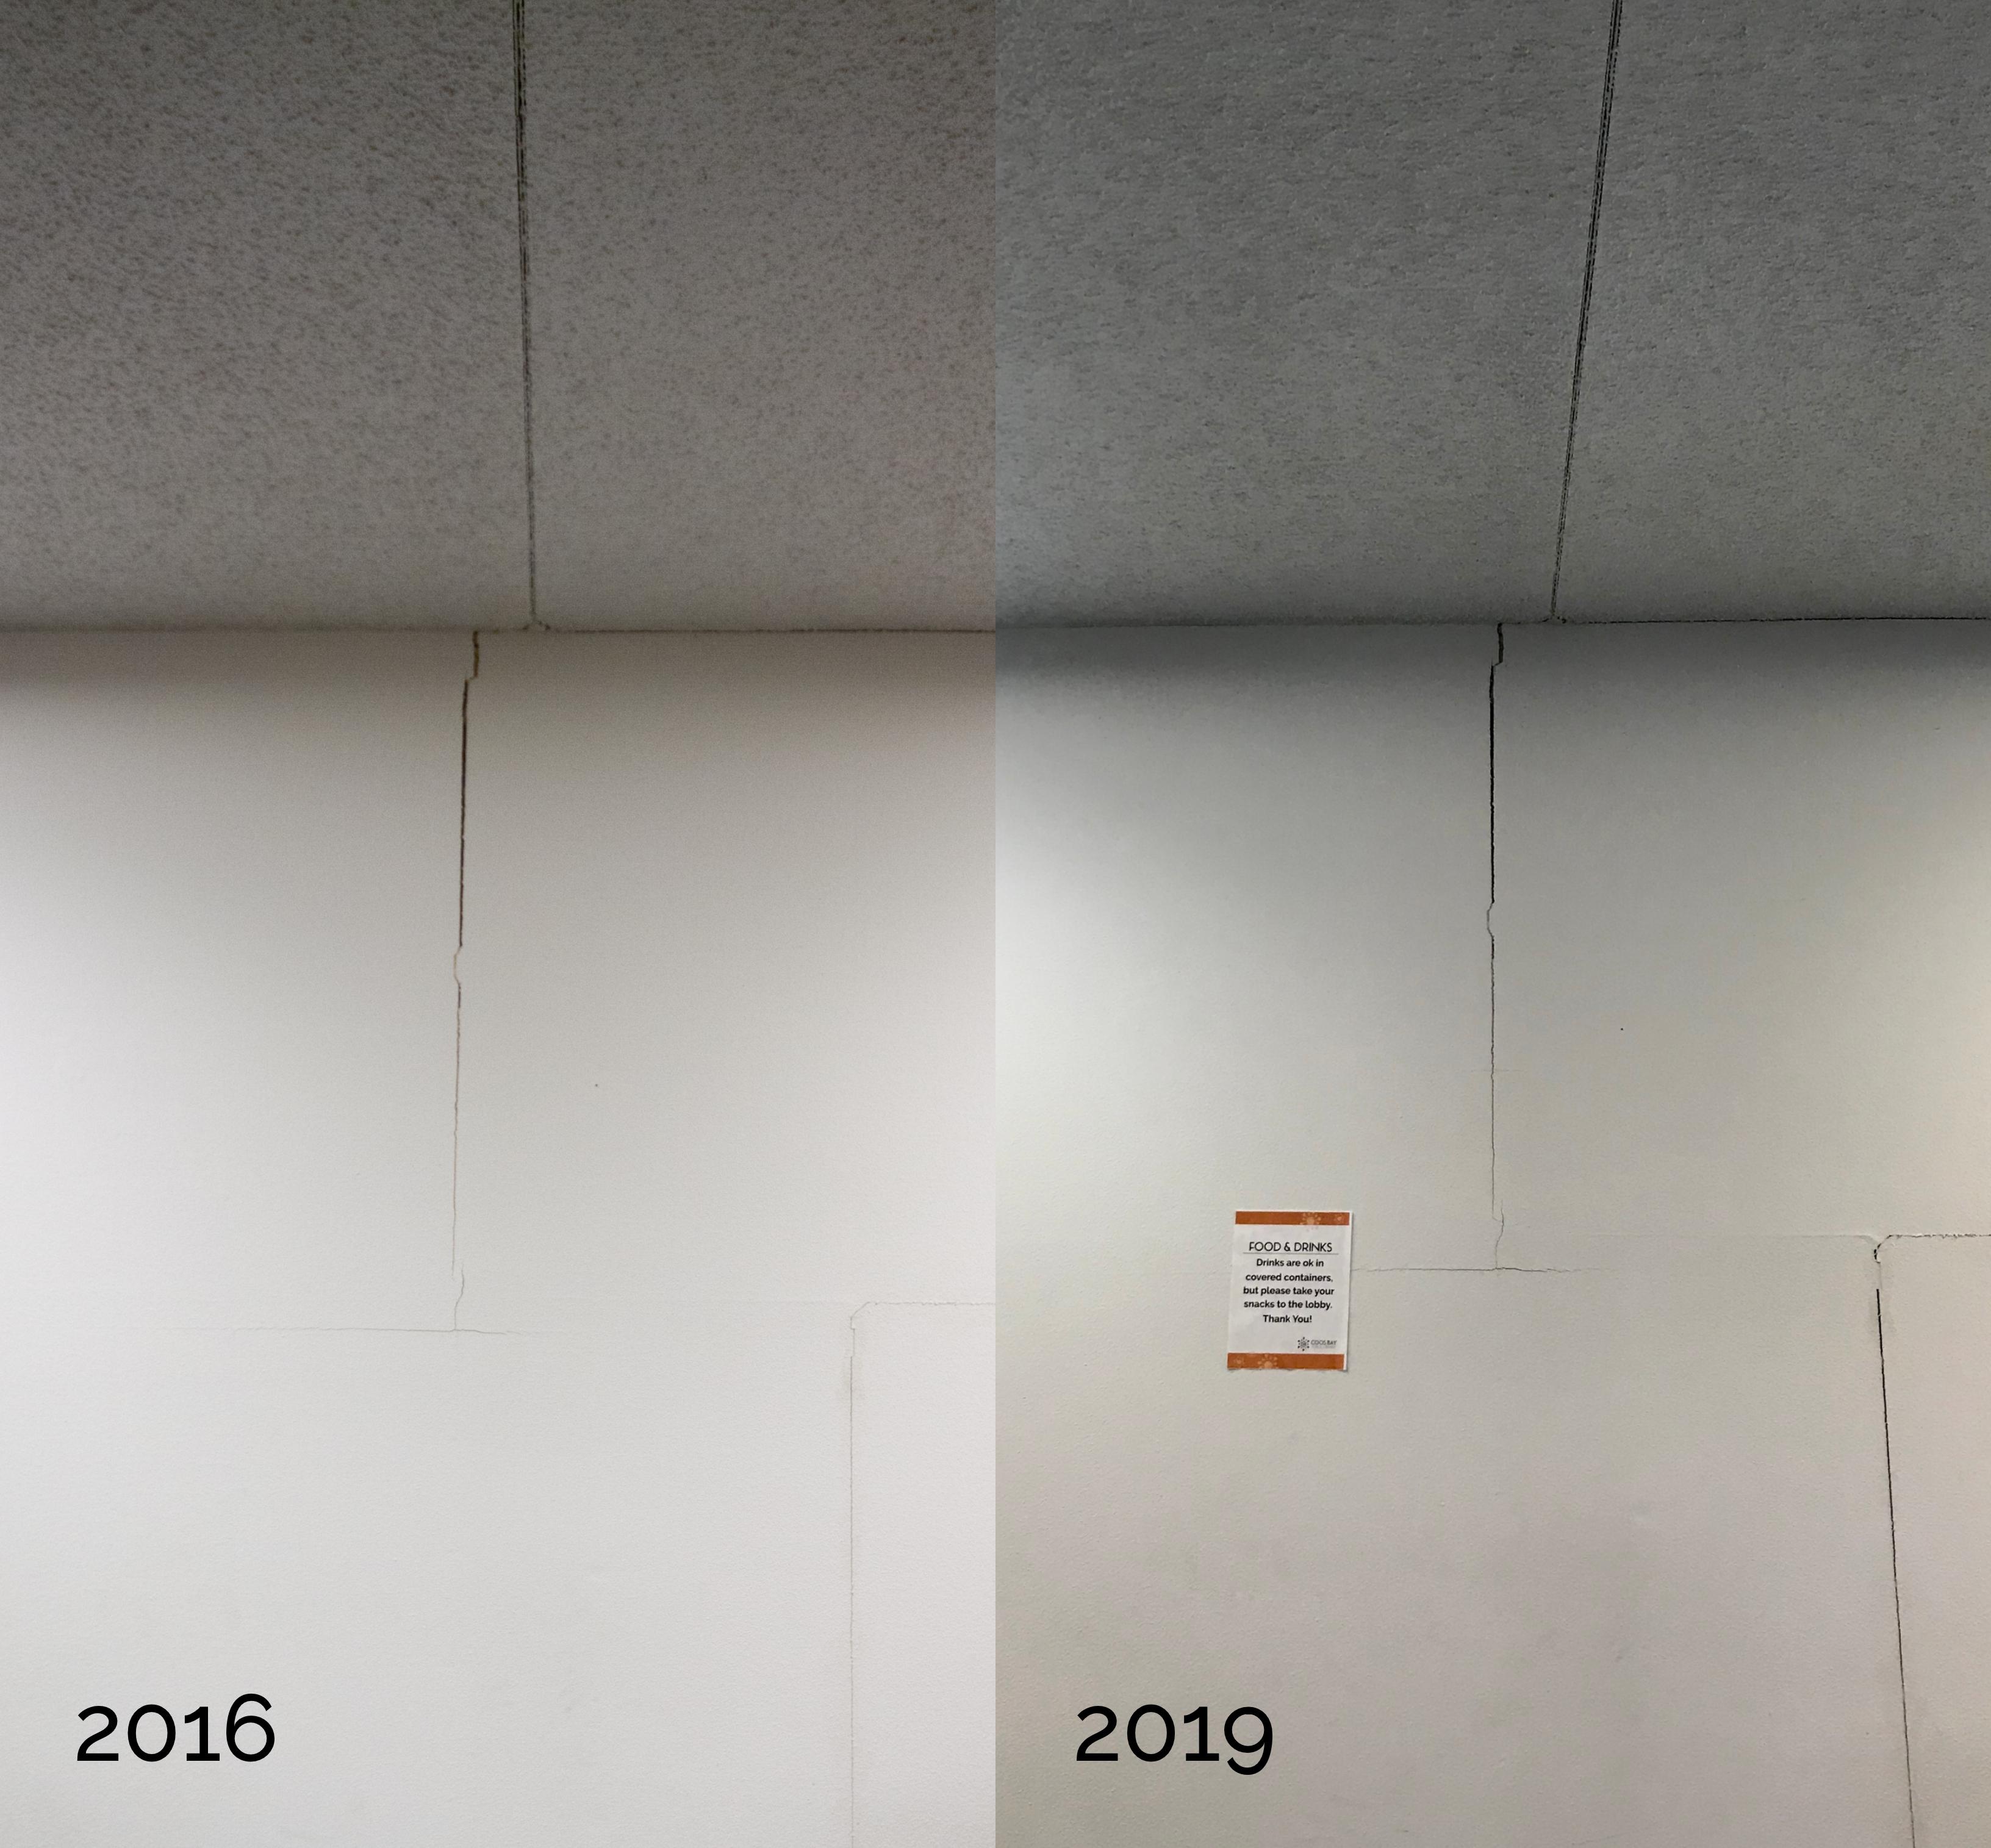 Wall crack expansion from 2016 and 2019